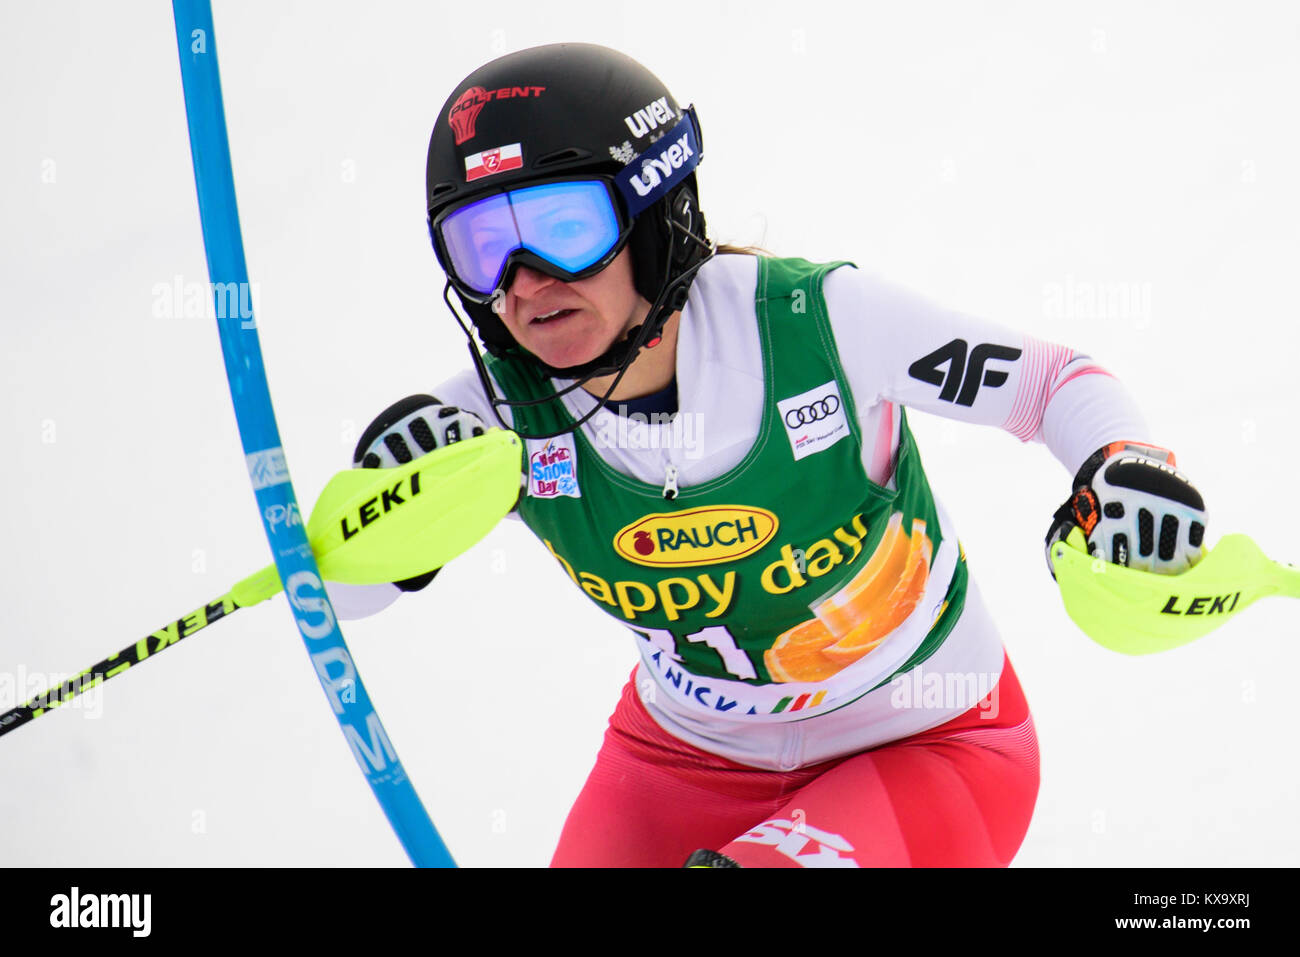 Kranjska Gora, Slovenia. 07th Jan, 2018. Maryna Gasienica-Daniel of Poland competes on course during the Slalom race at the 54th Golden Fox FIS World Cup in Kranjska Gora, Slovenia on January 7, 2018. Credit: PACIFIC PRESS/Alamy Live News Stock Photo